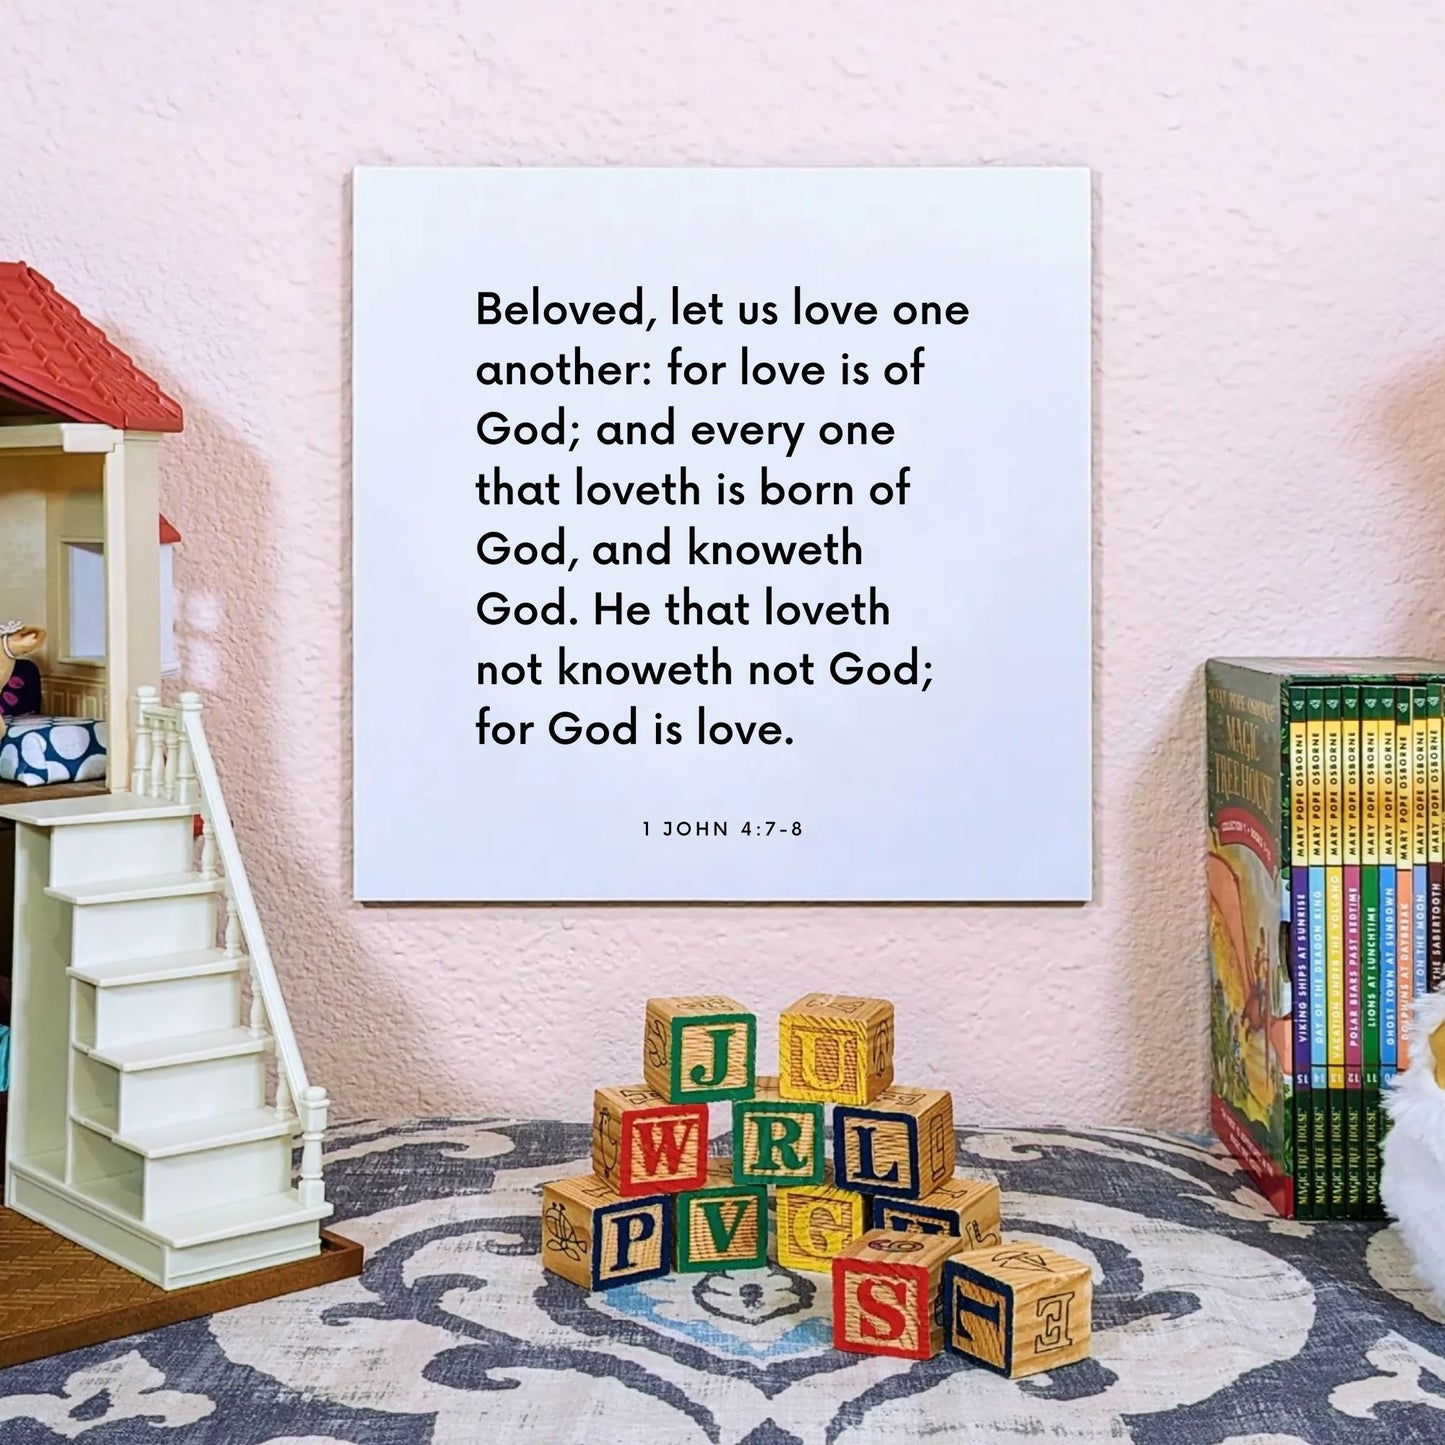 Playroom mouting of the scripture tile for 1 John 4:7-8 - "Beloved, let us love one another: for love is of God"